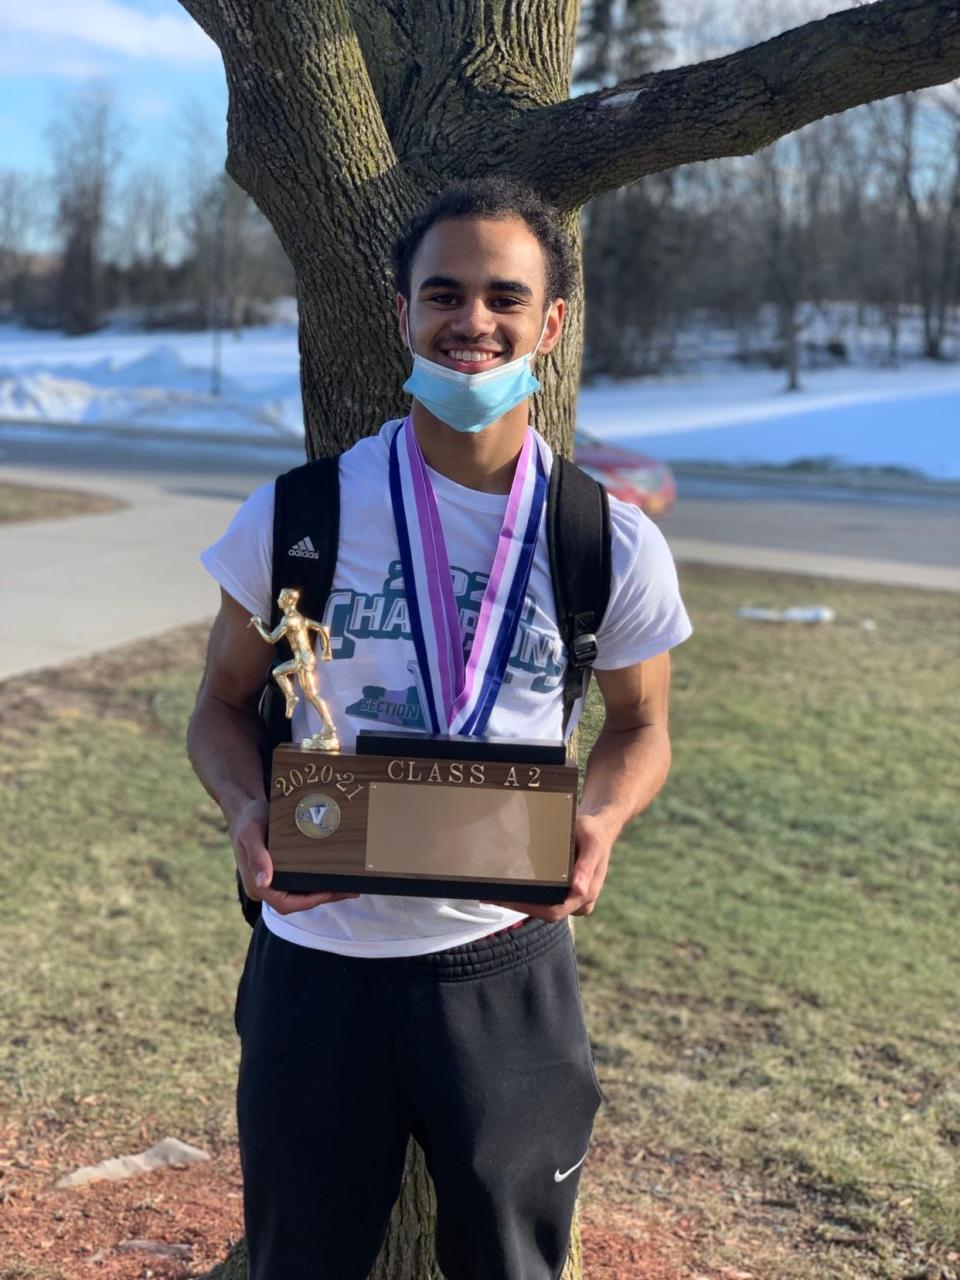 Norwood Hughes is a member of the 2021 Democrat and Chronicle All-Greater Rochester Boys Indoor Track and Field Team.